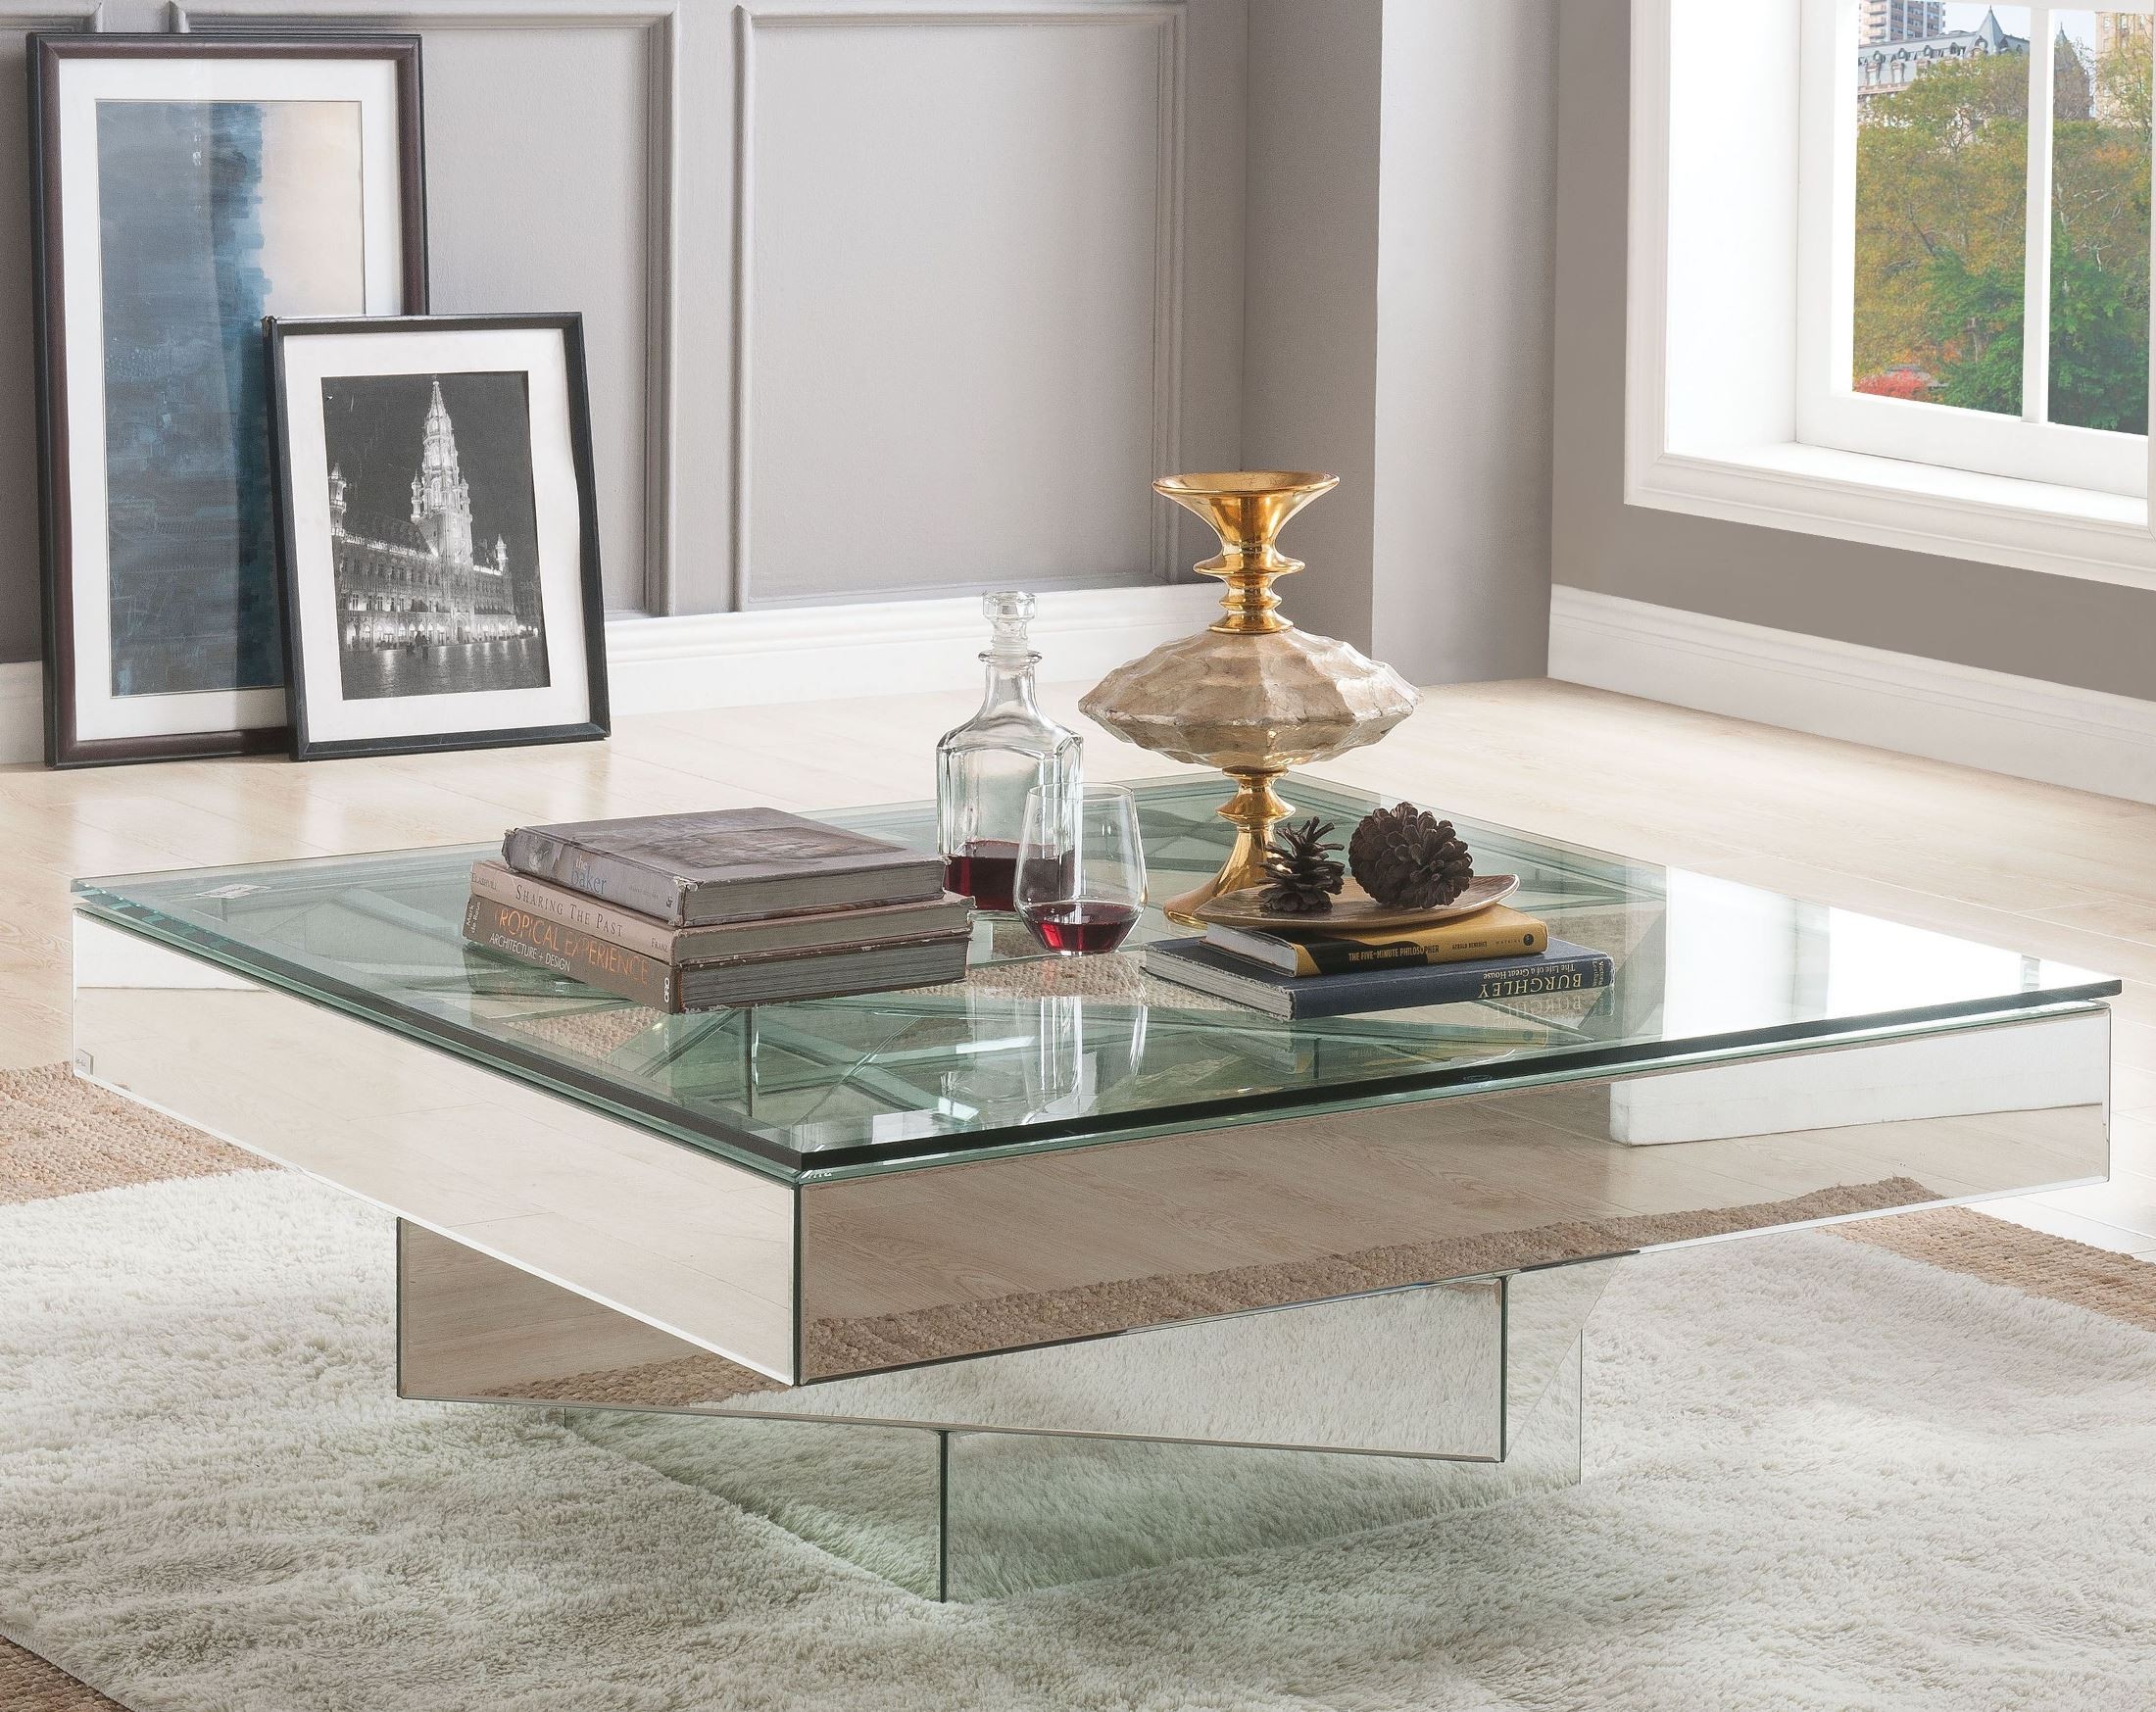 Unique Mirrored Coffee Table for Small Space